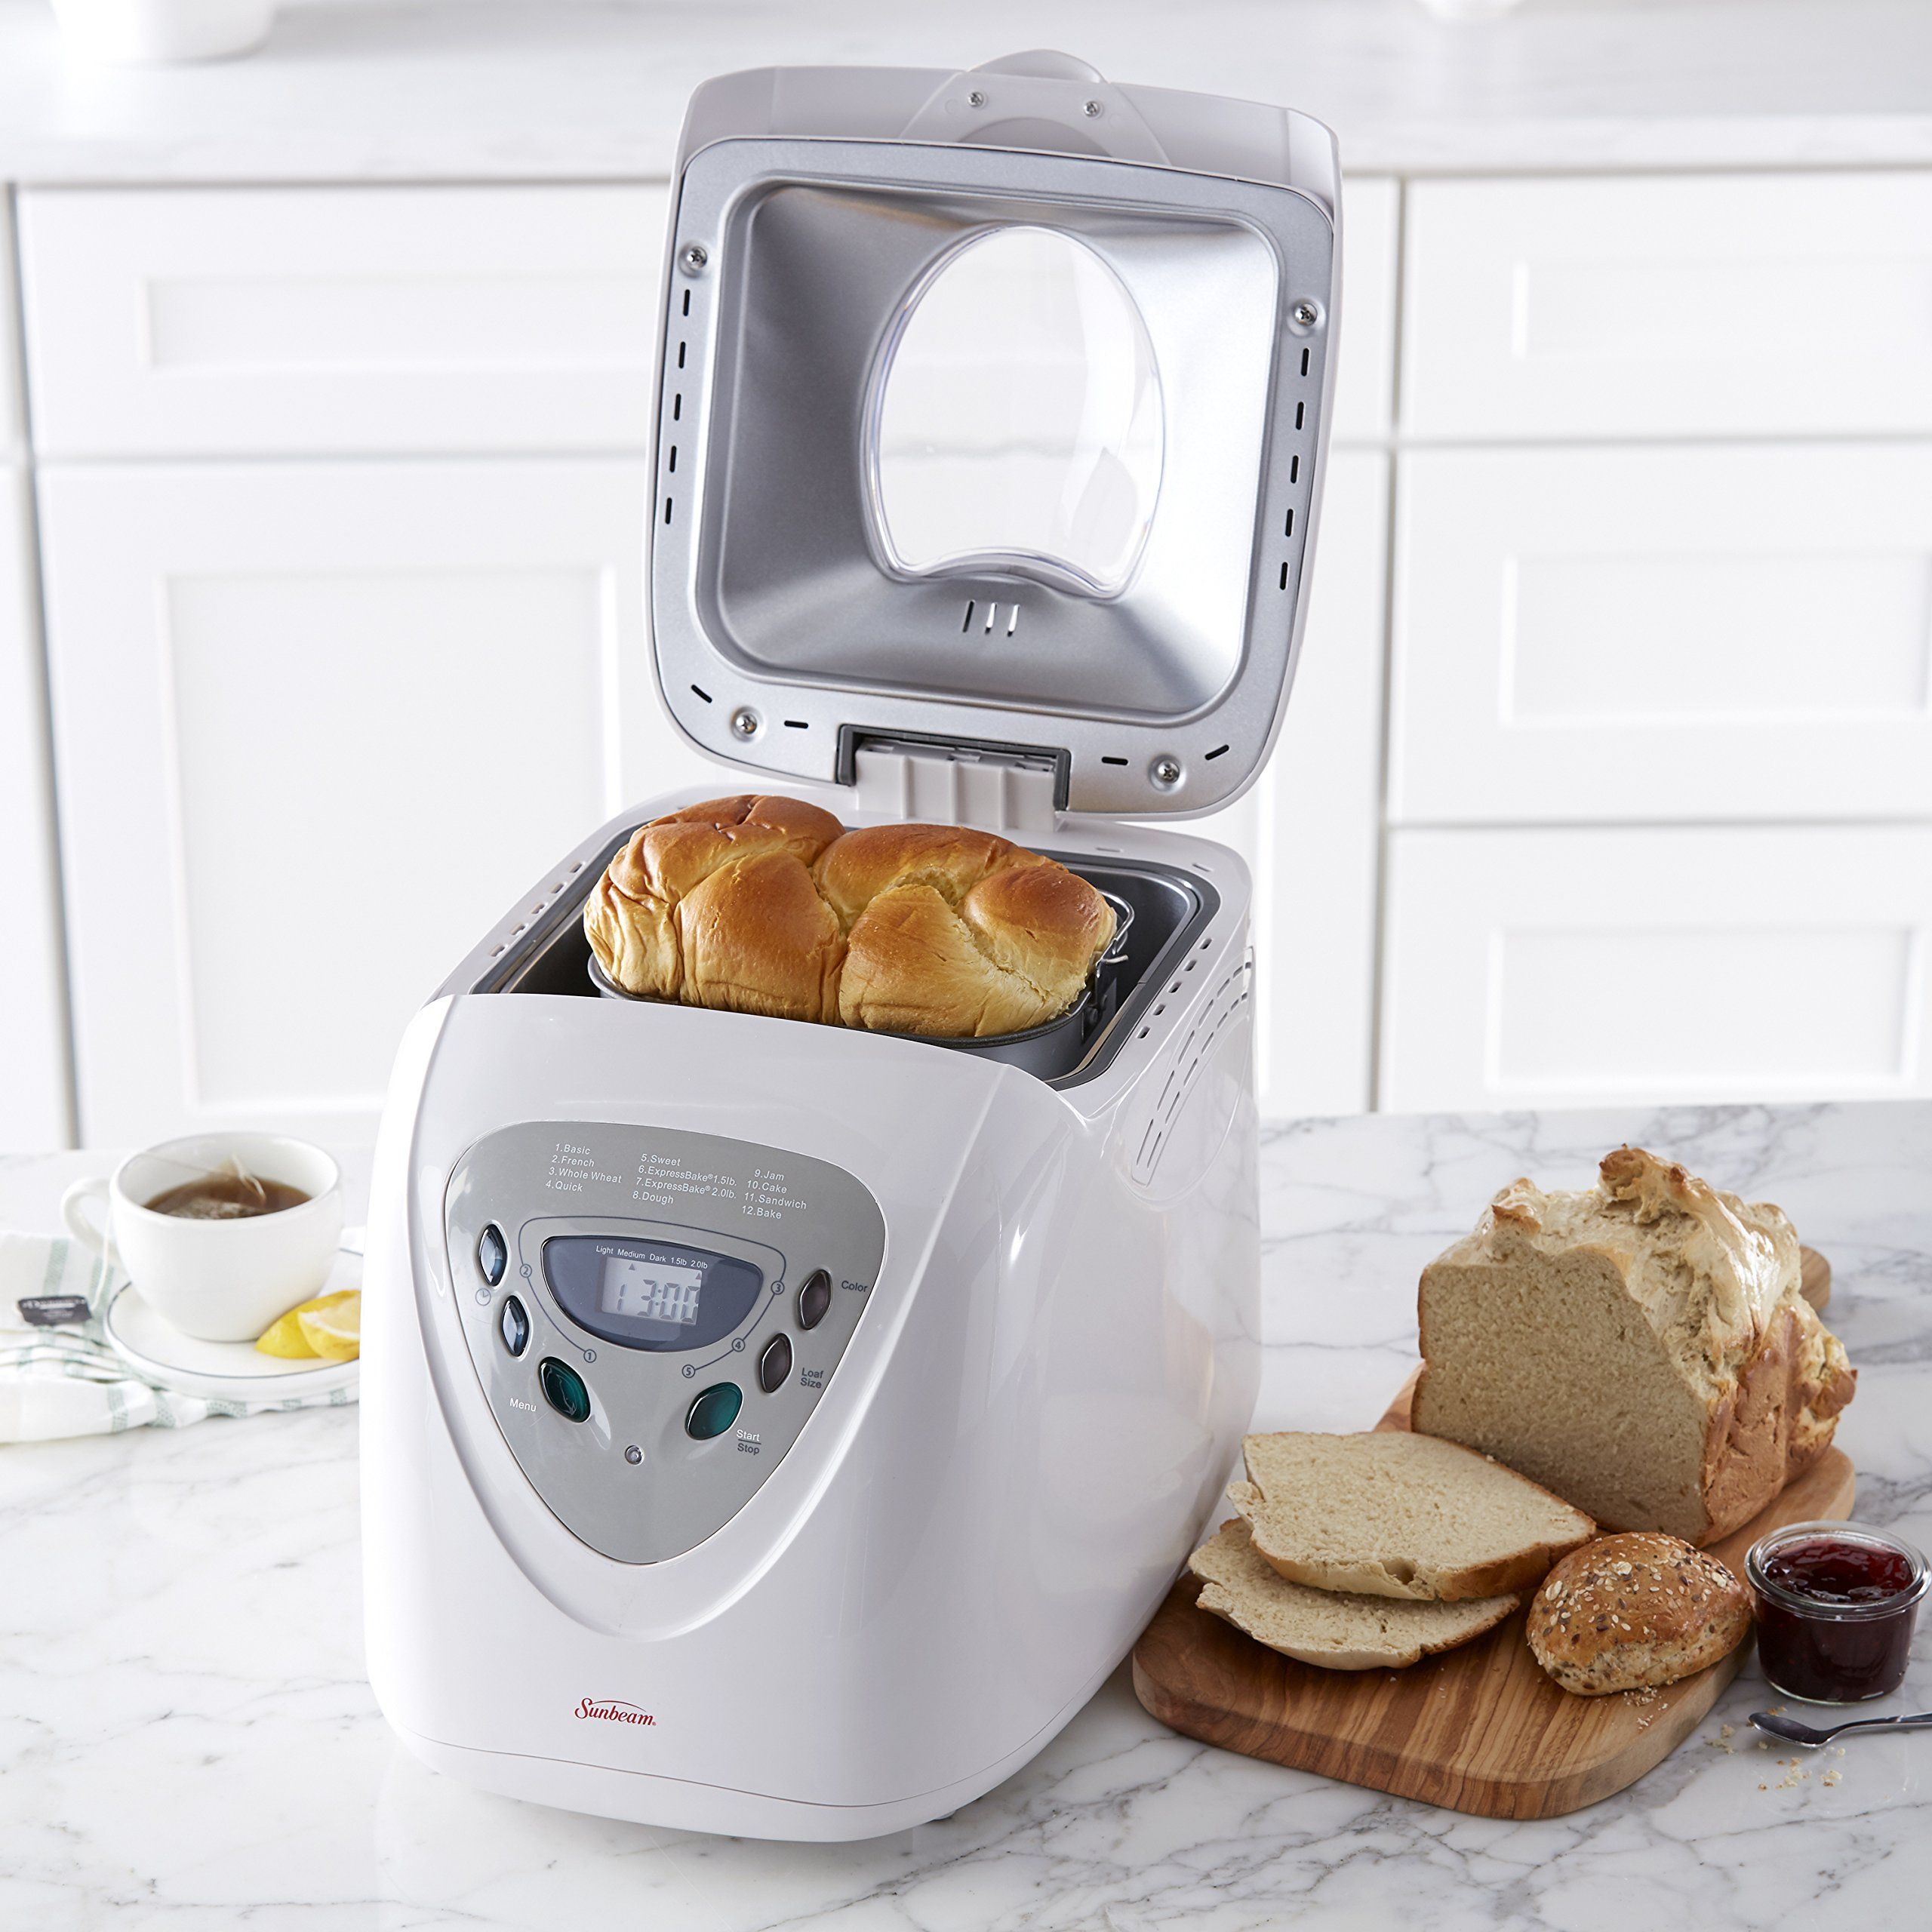 Budget-Friendly Bread Making: Getting Started with the Sunbeam Programmable Bread Maker